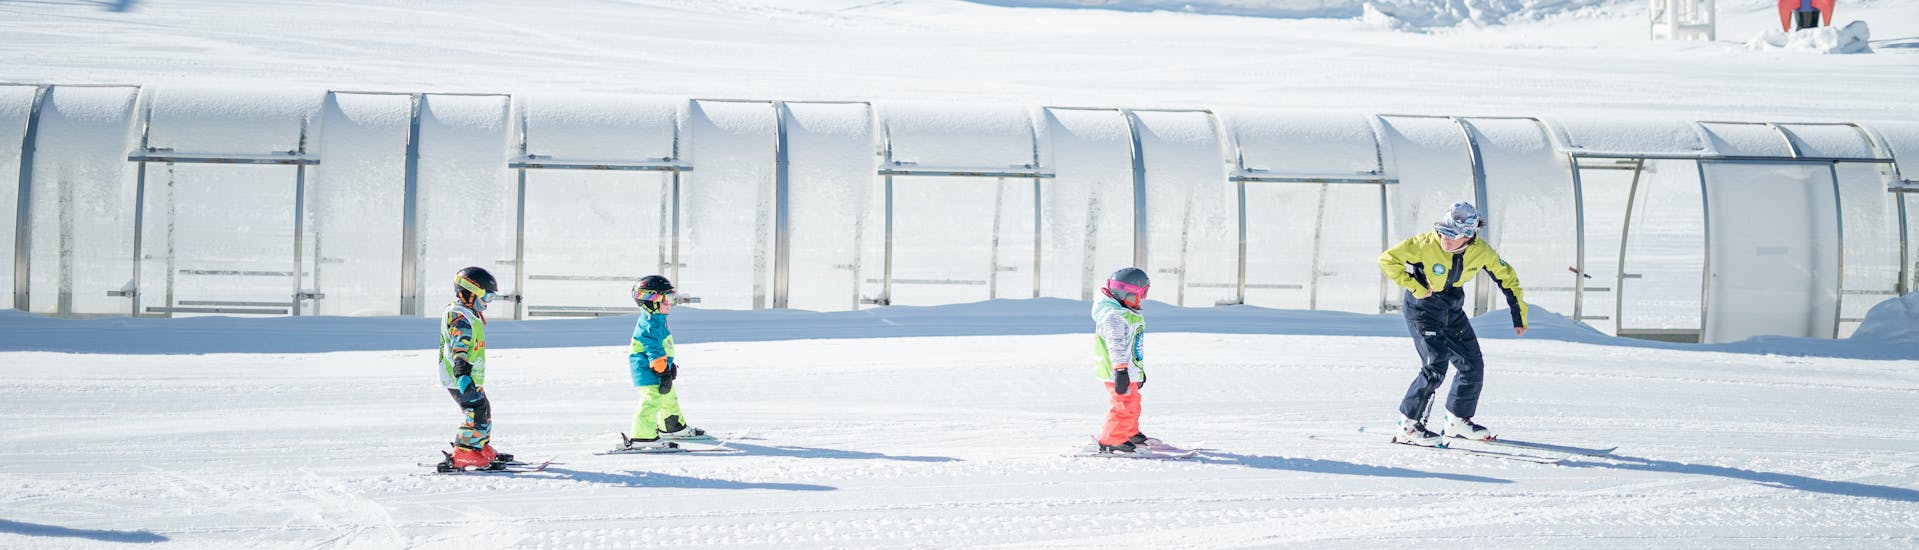 On the slope of the snow garden of Prosneige Tignes there is a  "Petit Ours" kids ski lesson.